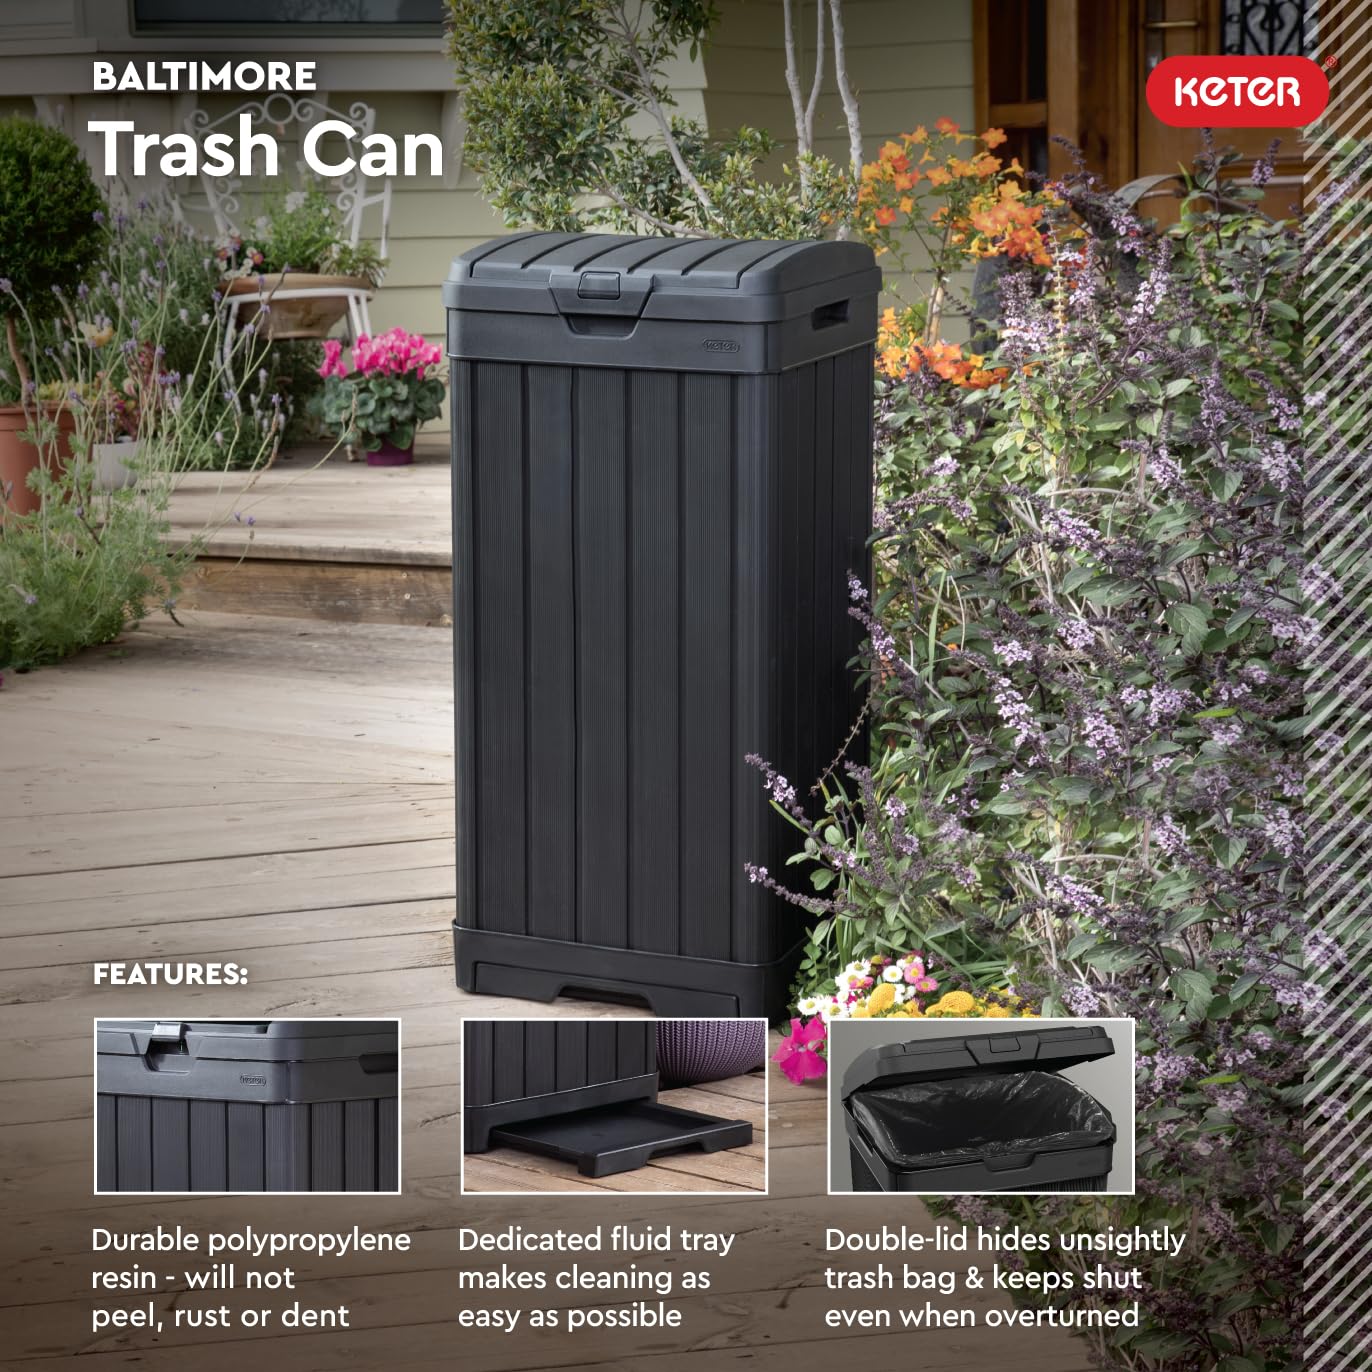 Keter Baltimore 38 Gallon Trash Can with Lid and Drip Tray for Easy  Cleaning-Perfect for Patios, Kitchens, and Outdoor Entertaining, 38 Gallons,  Black